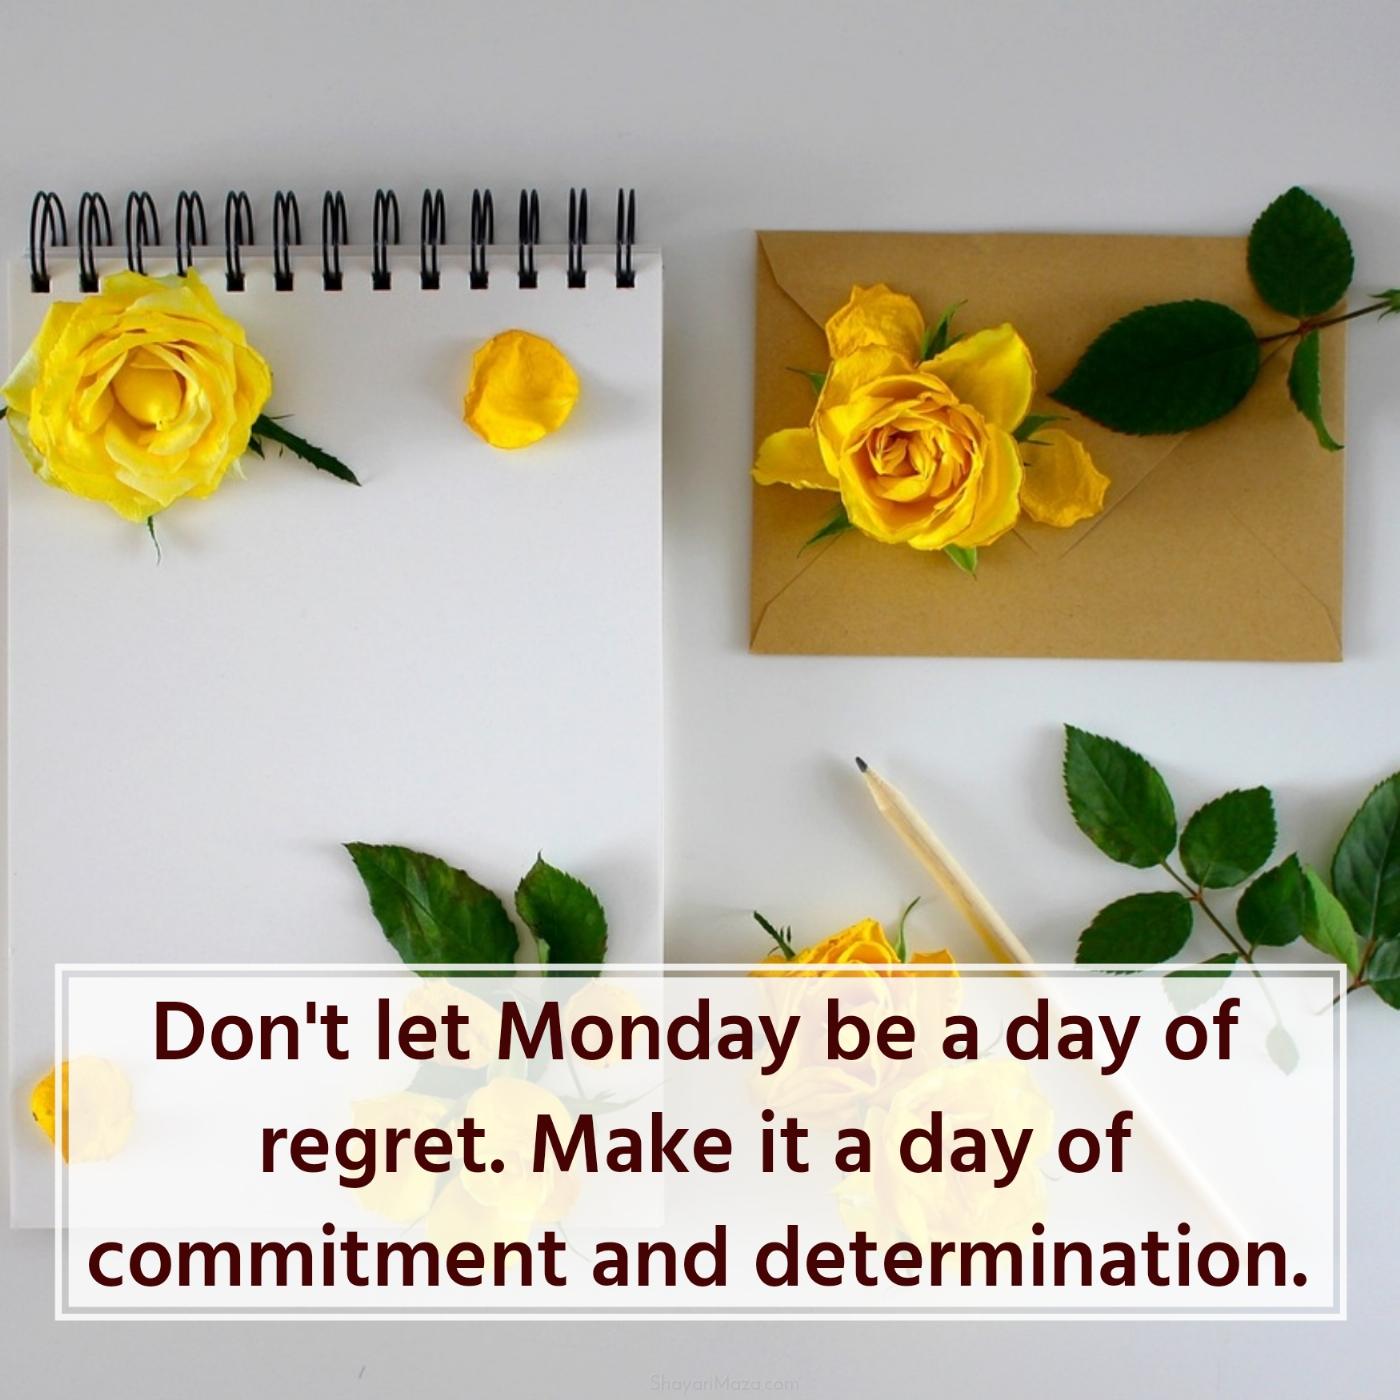 Don't let Monday be a day of regret